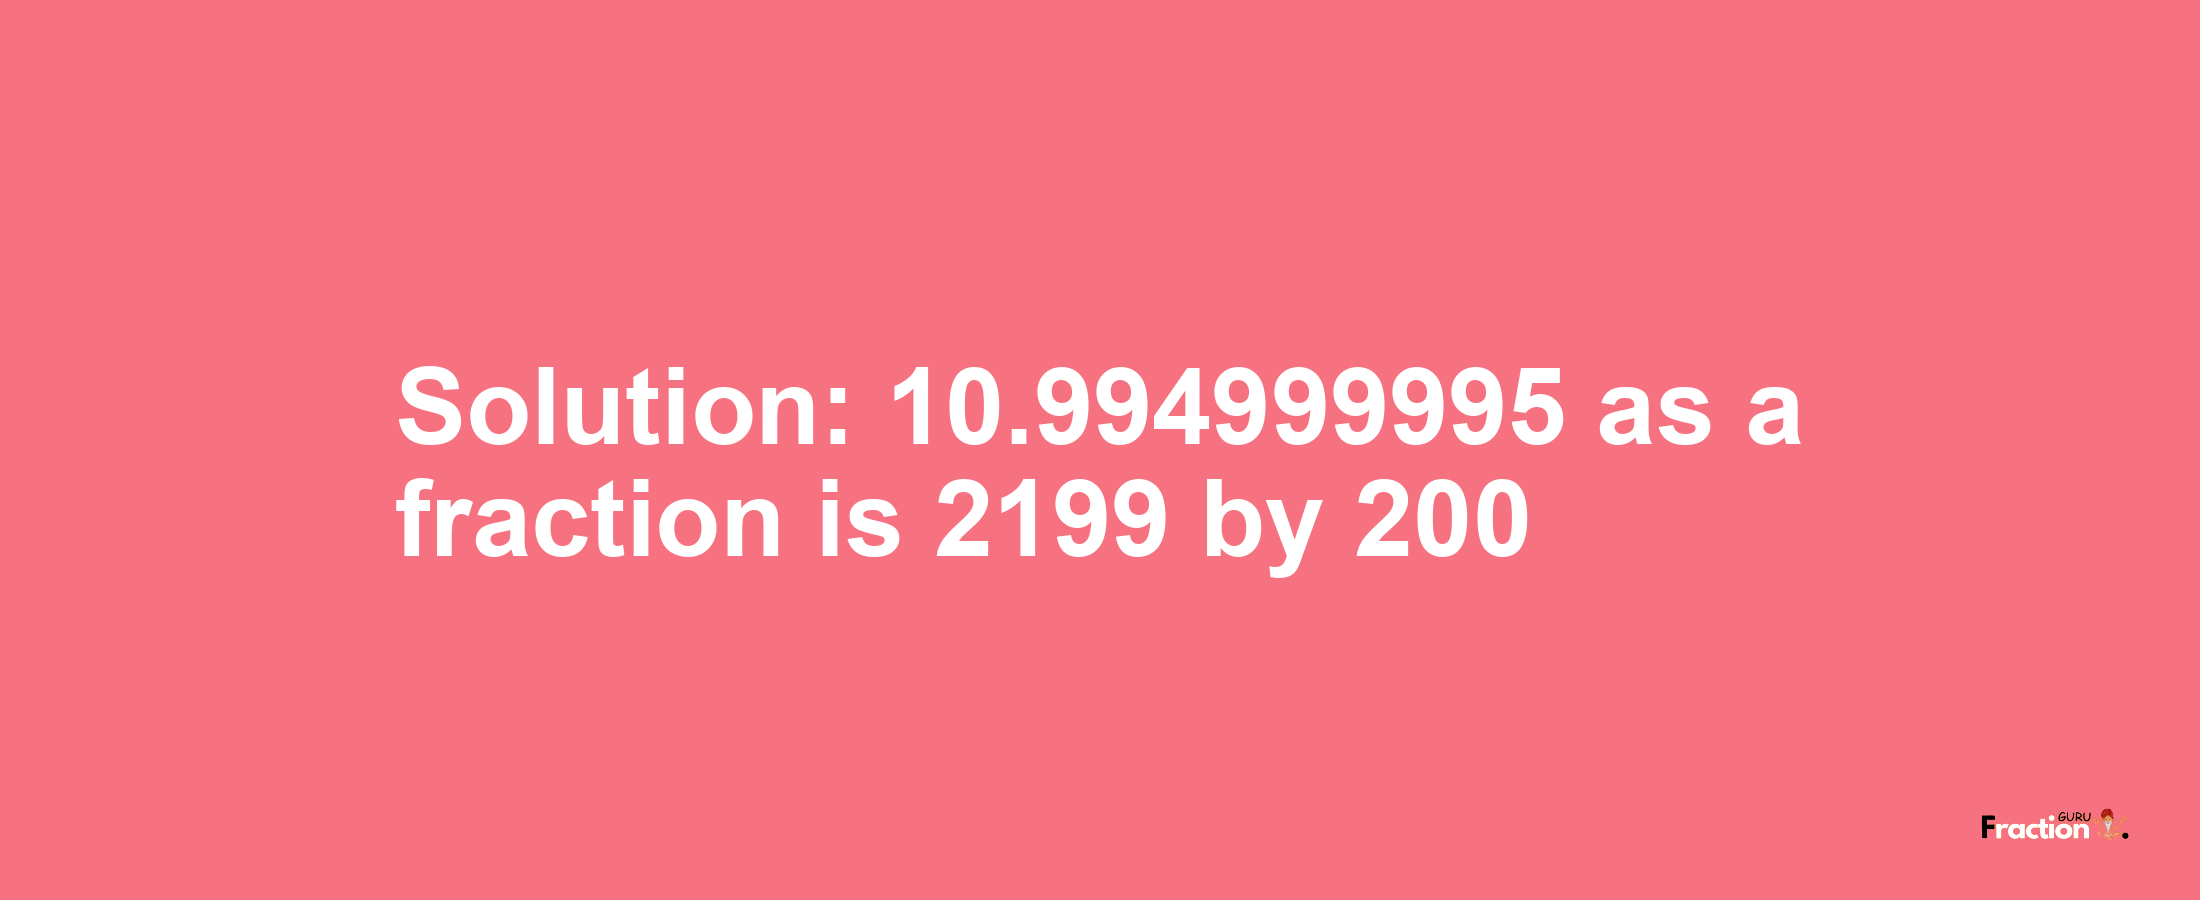 Solution:10.994999995 as a fraction is 2199/200